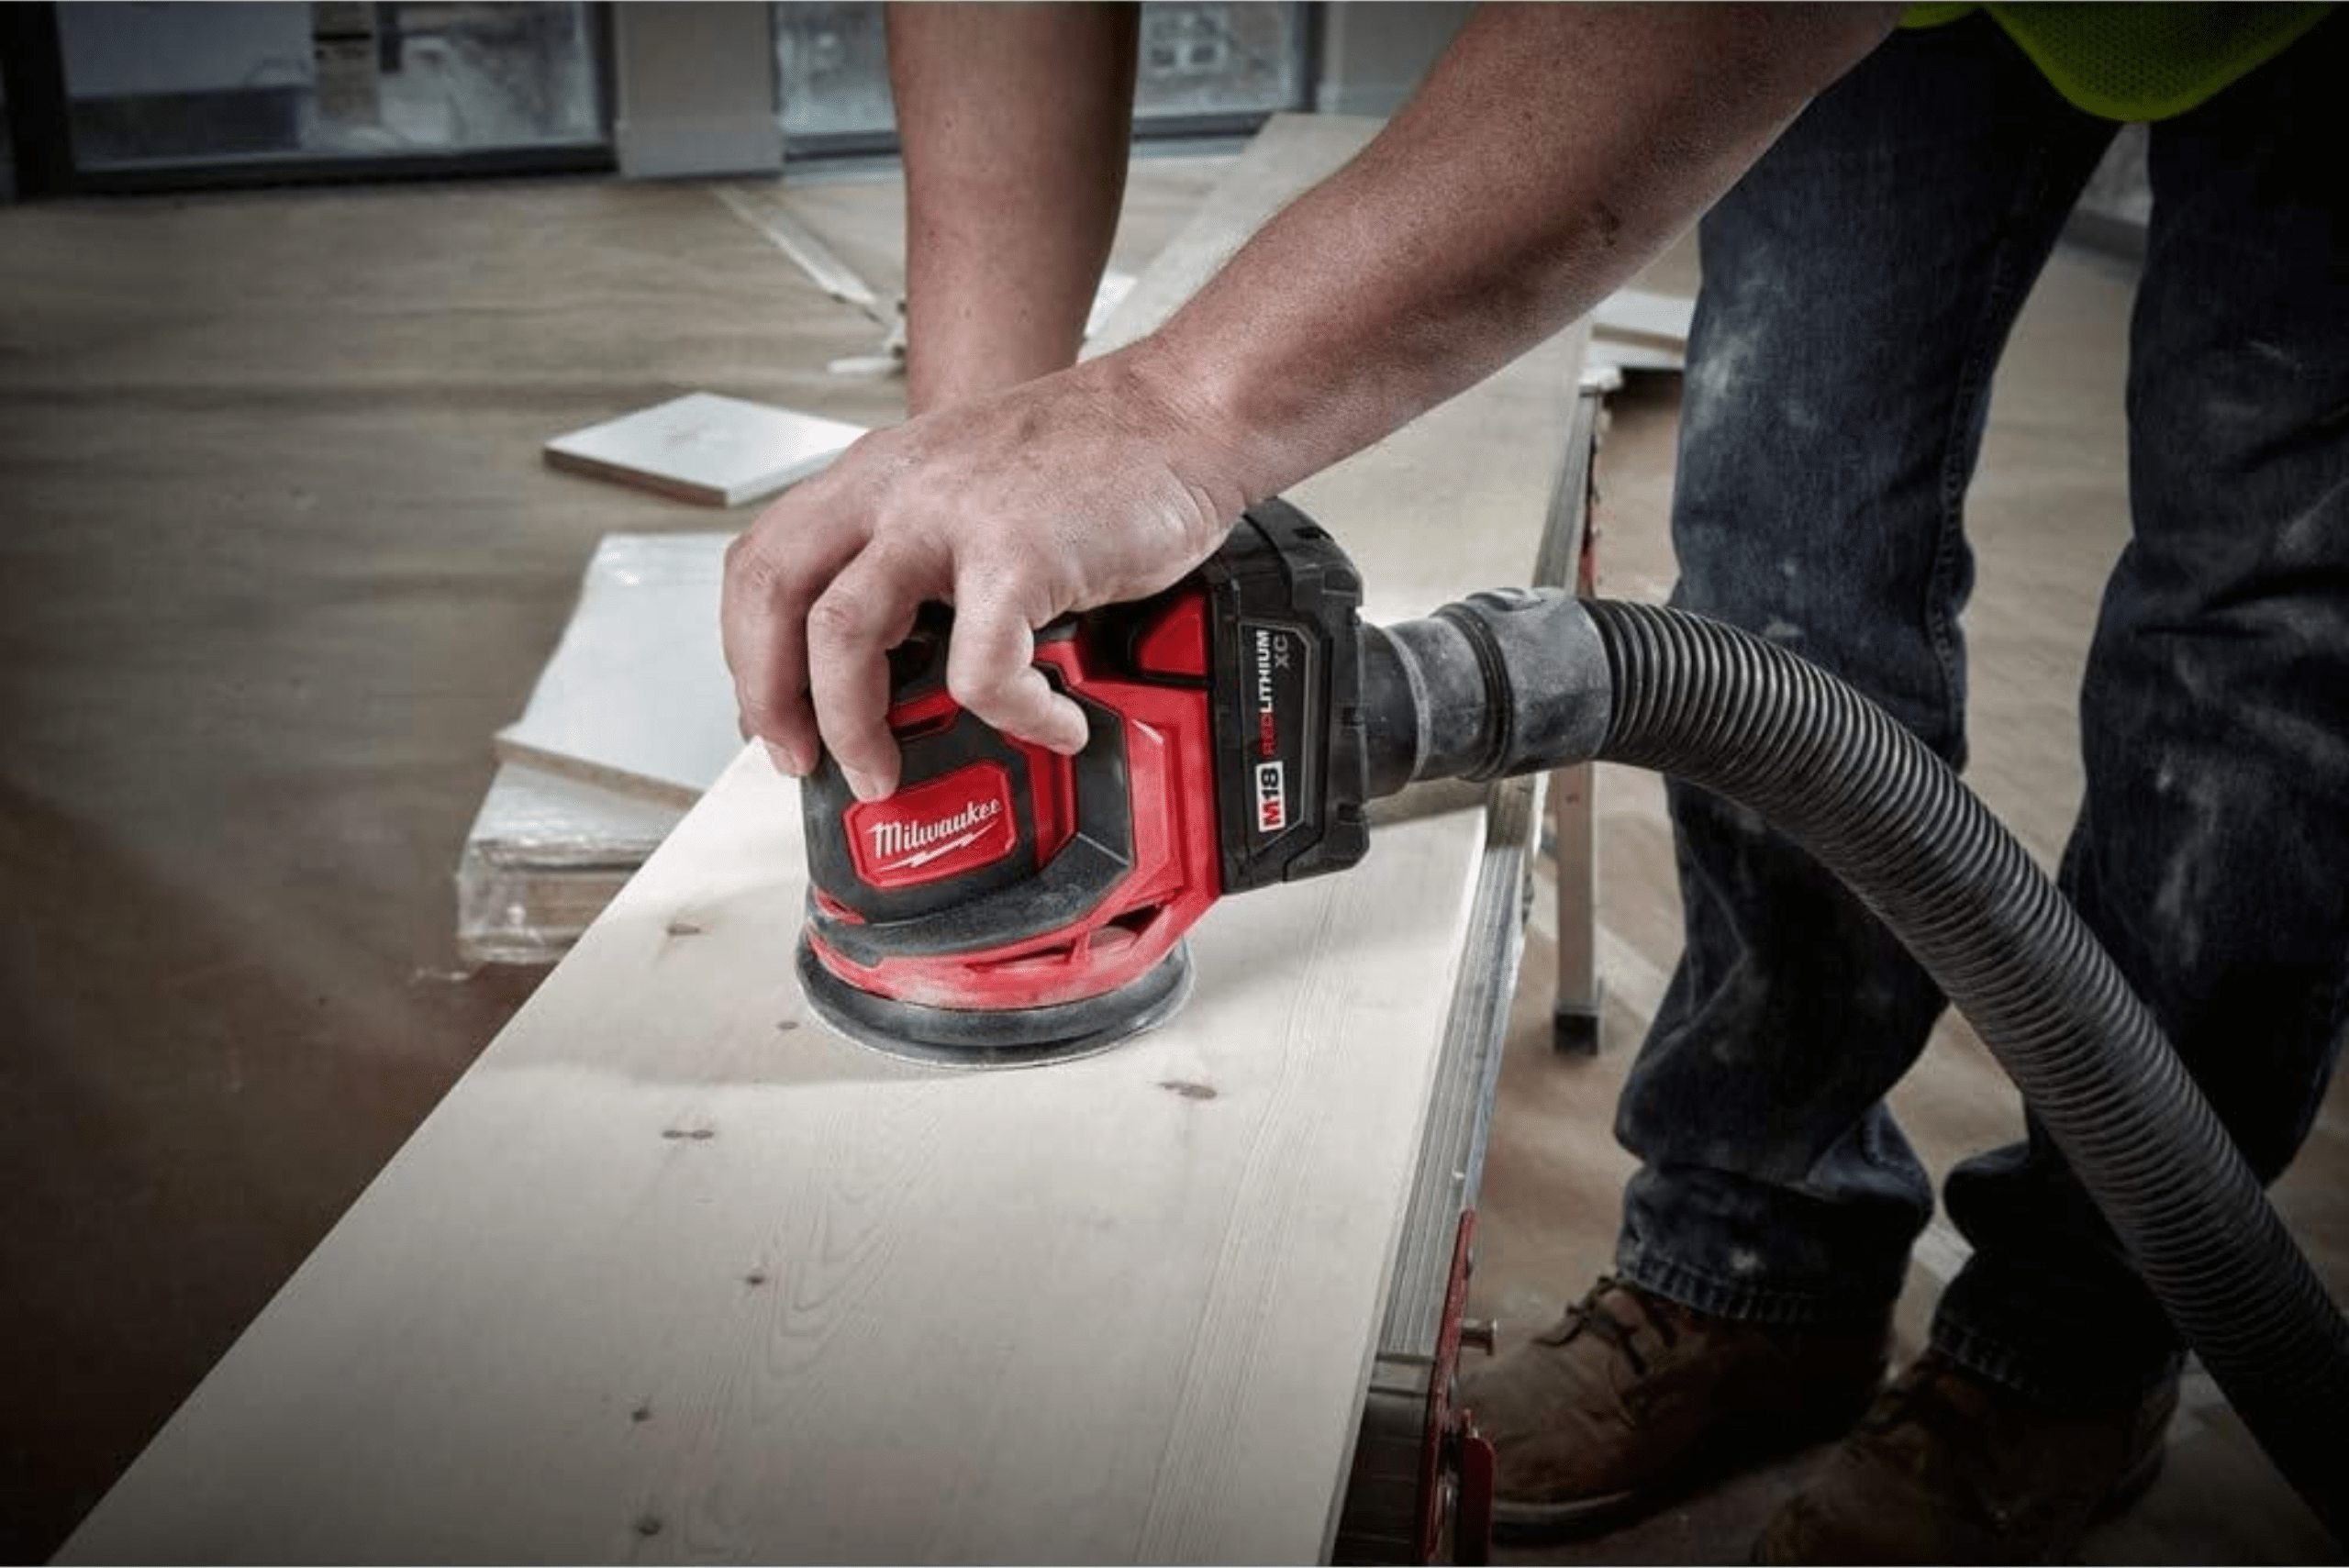 Milwaukee sander power tool attached to a dust hose being used to sand a wooden board.